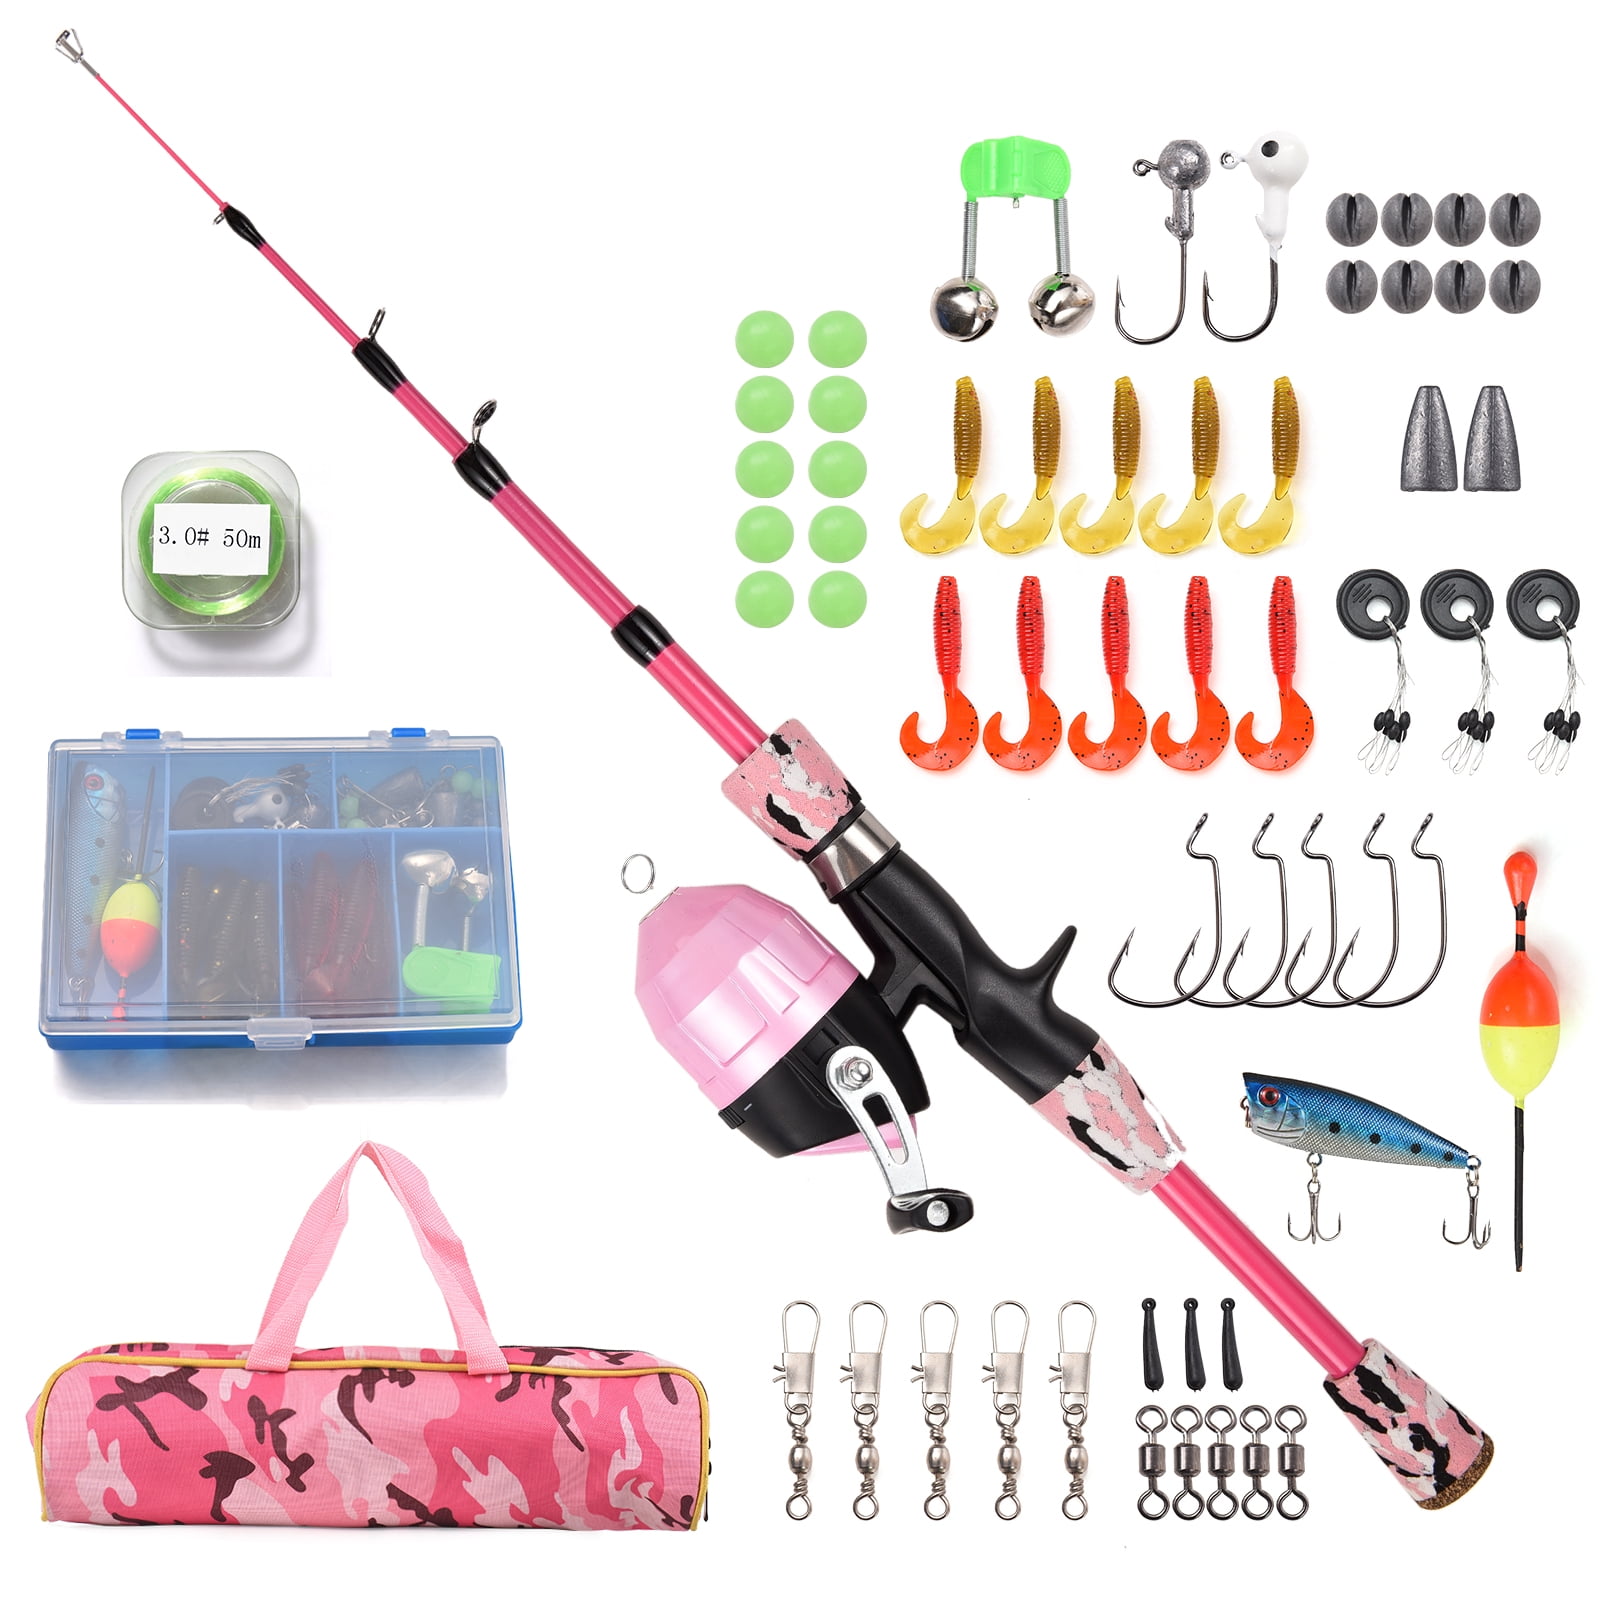 EDTara Telescopic Fishing Rod Reel Combos Set 1.8m Carbon Fiber Fishing  Pole With Full Kits Carrier Bag For Beginner And Youth Travel Saltwater